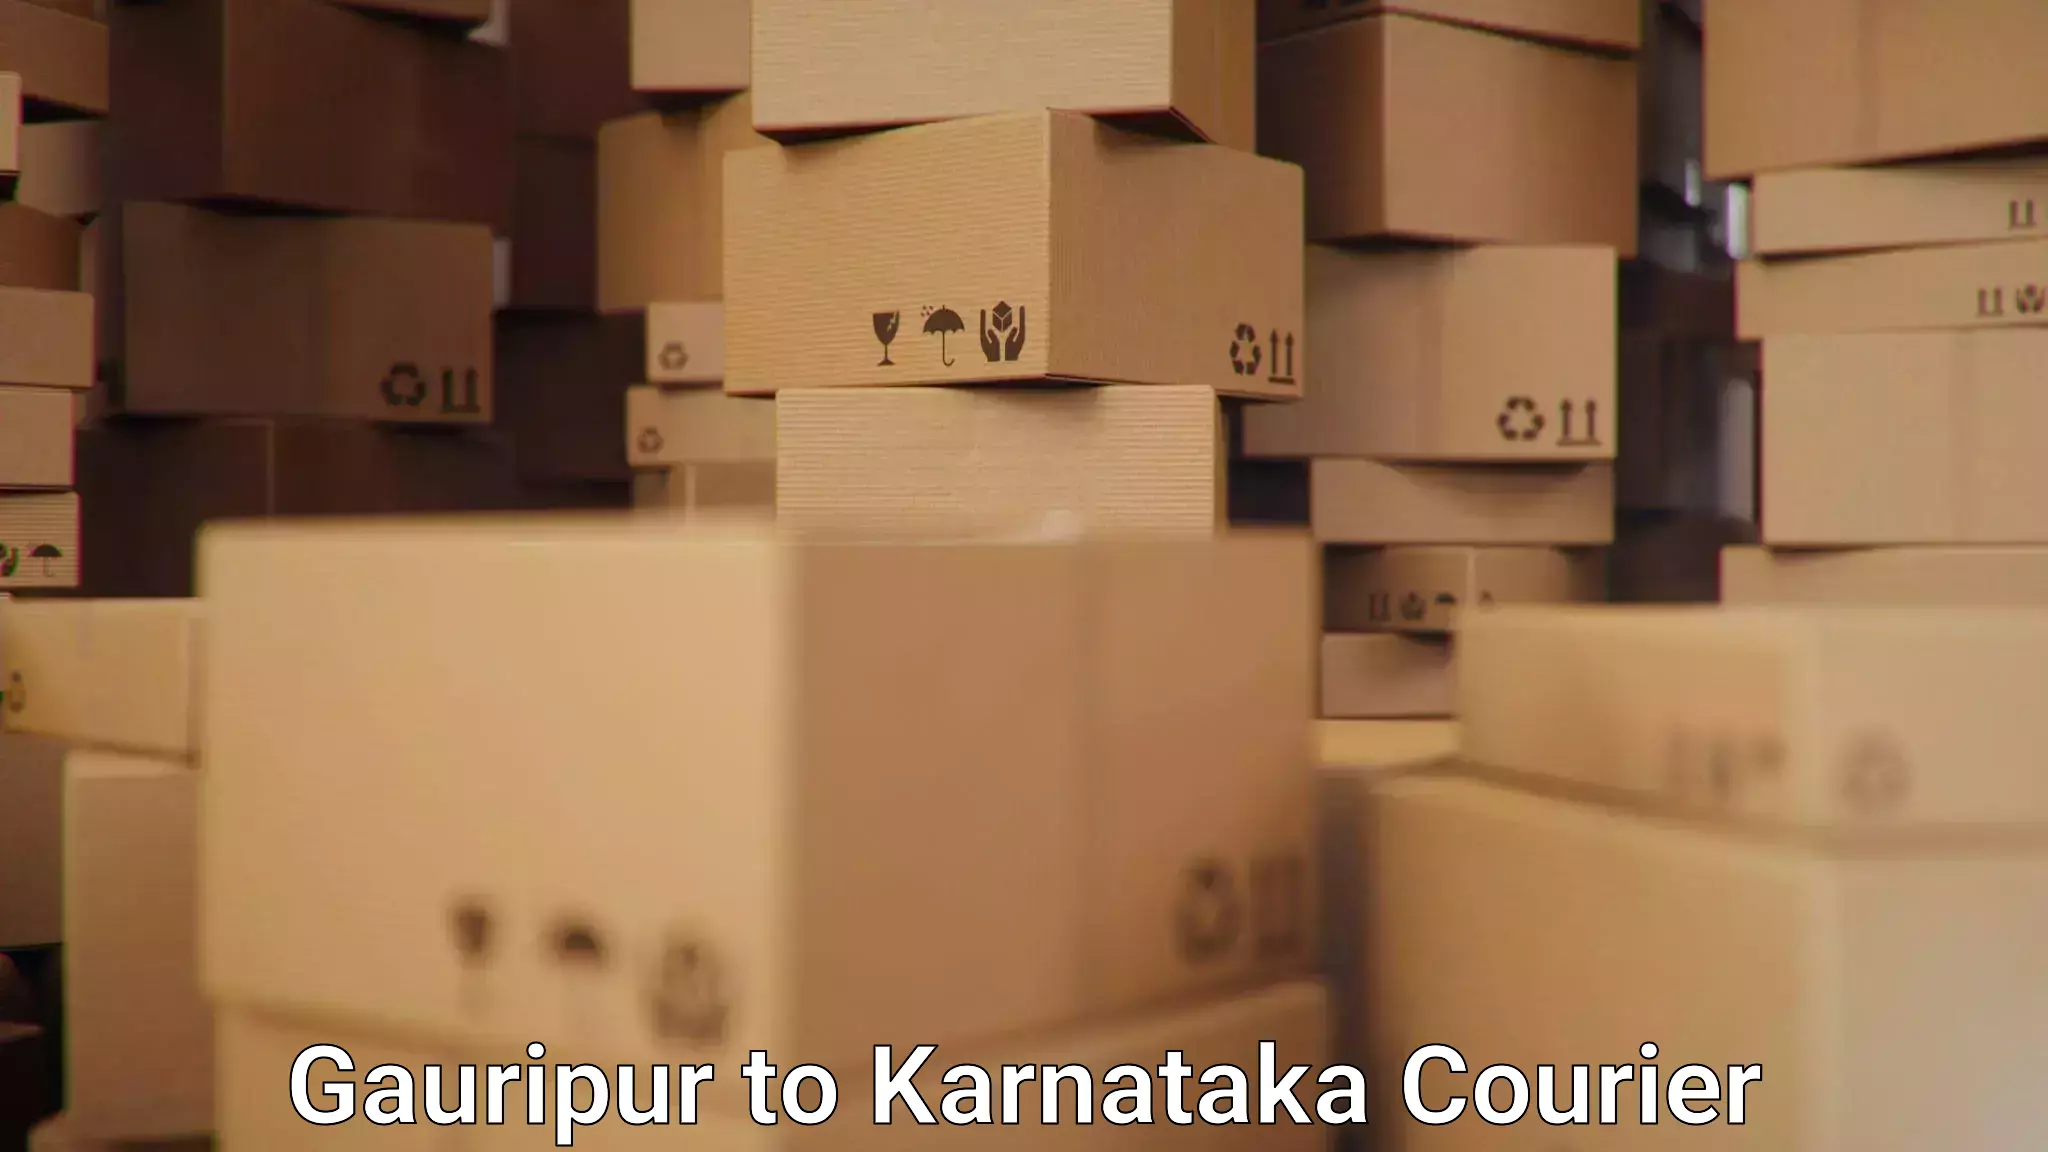 Subscription-based courier Gauripur to Basavakalyan